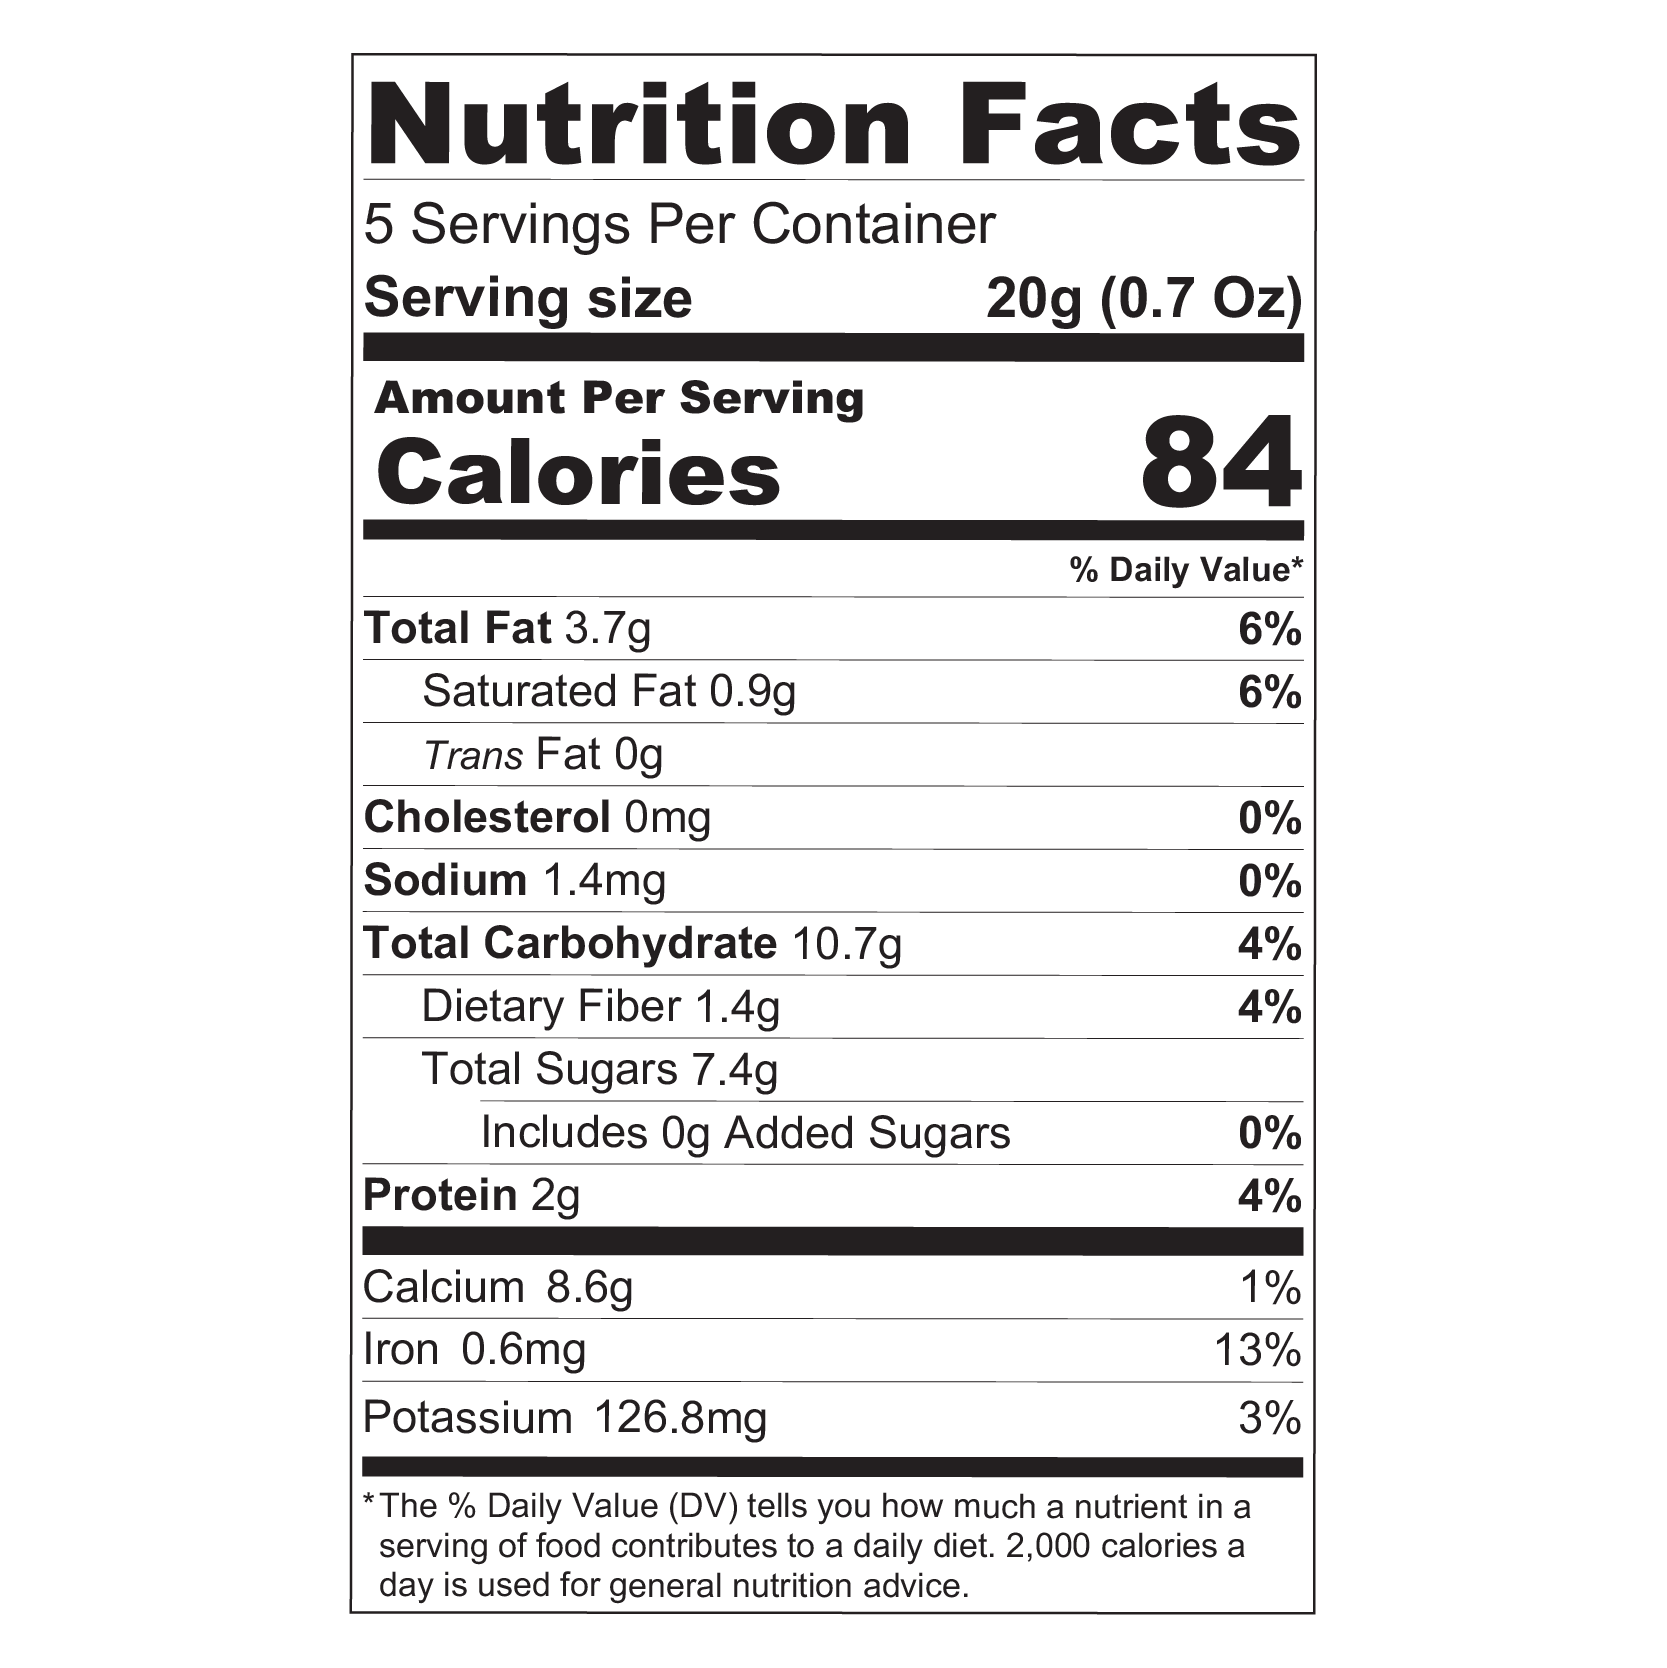 Energy_balls_nutritionfacts_cashew.png